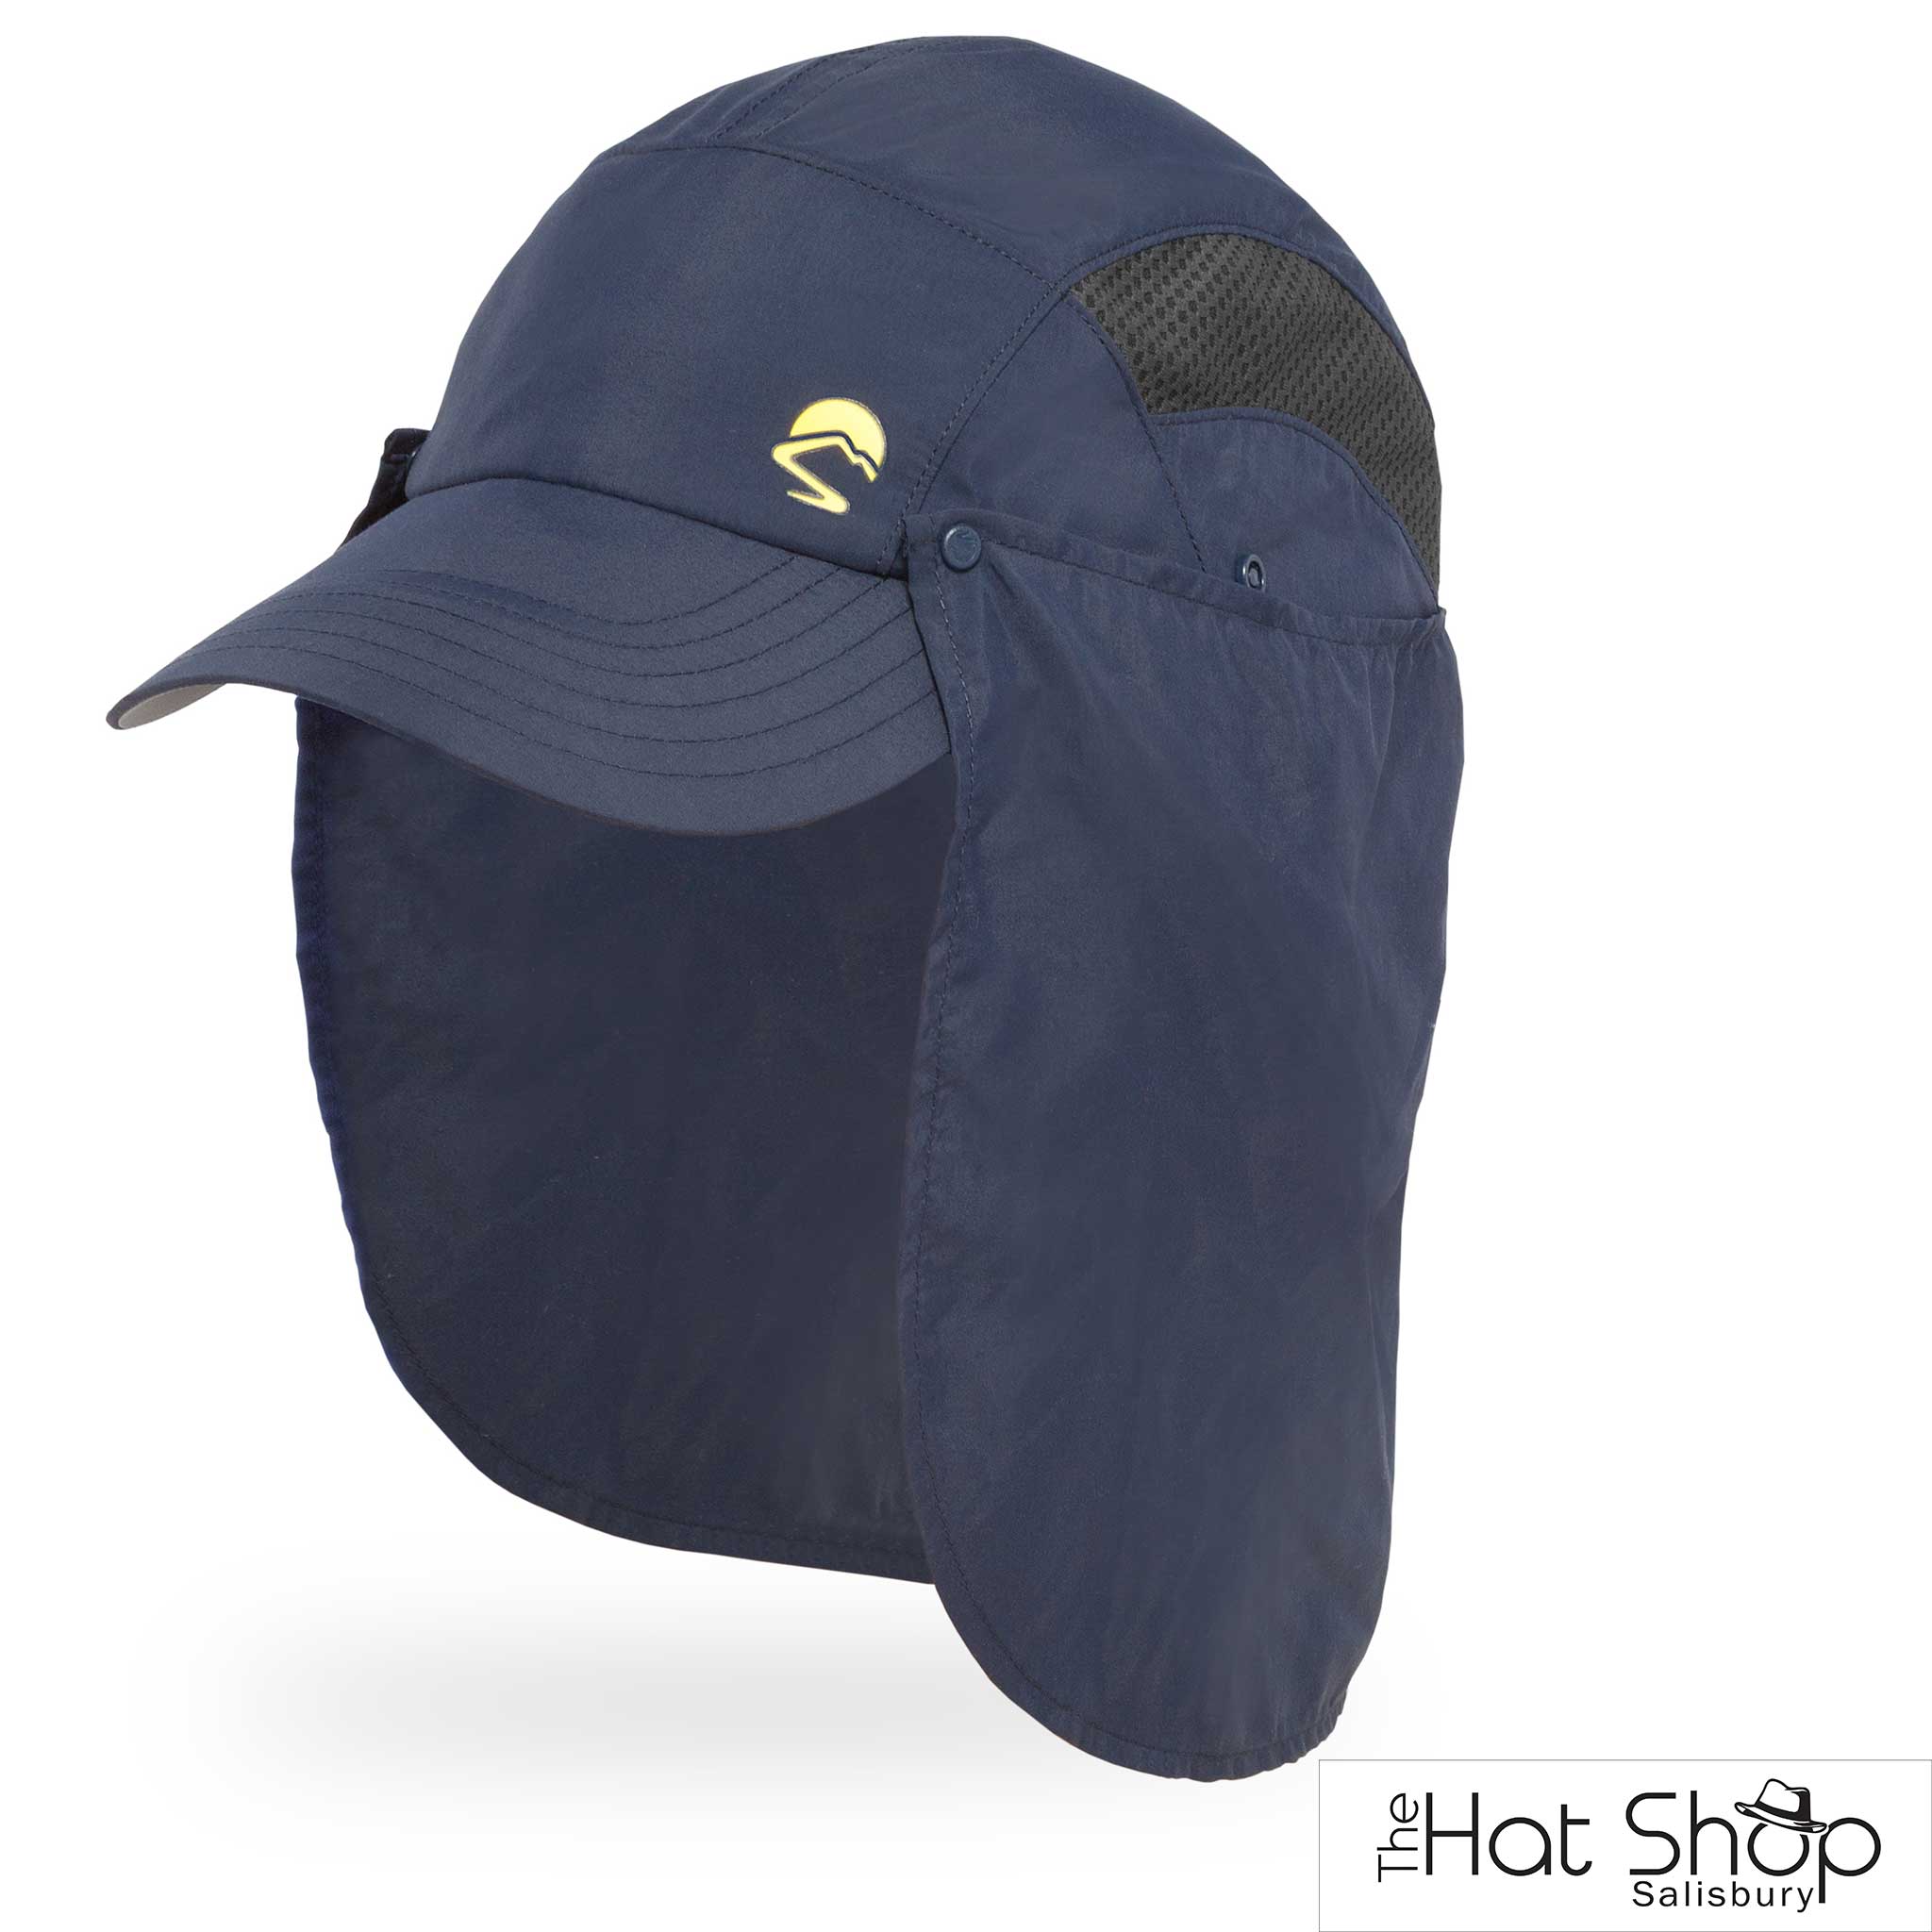 Sunday Afternoons Adventure Stow Hat Navy UPF50+ - The Hat Shop Salisbury